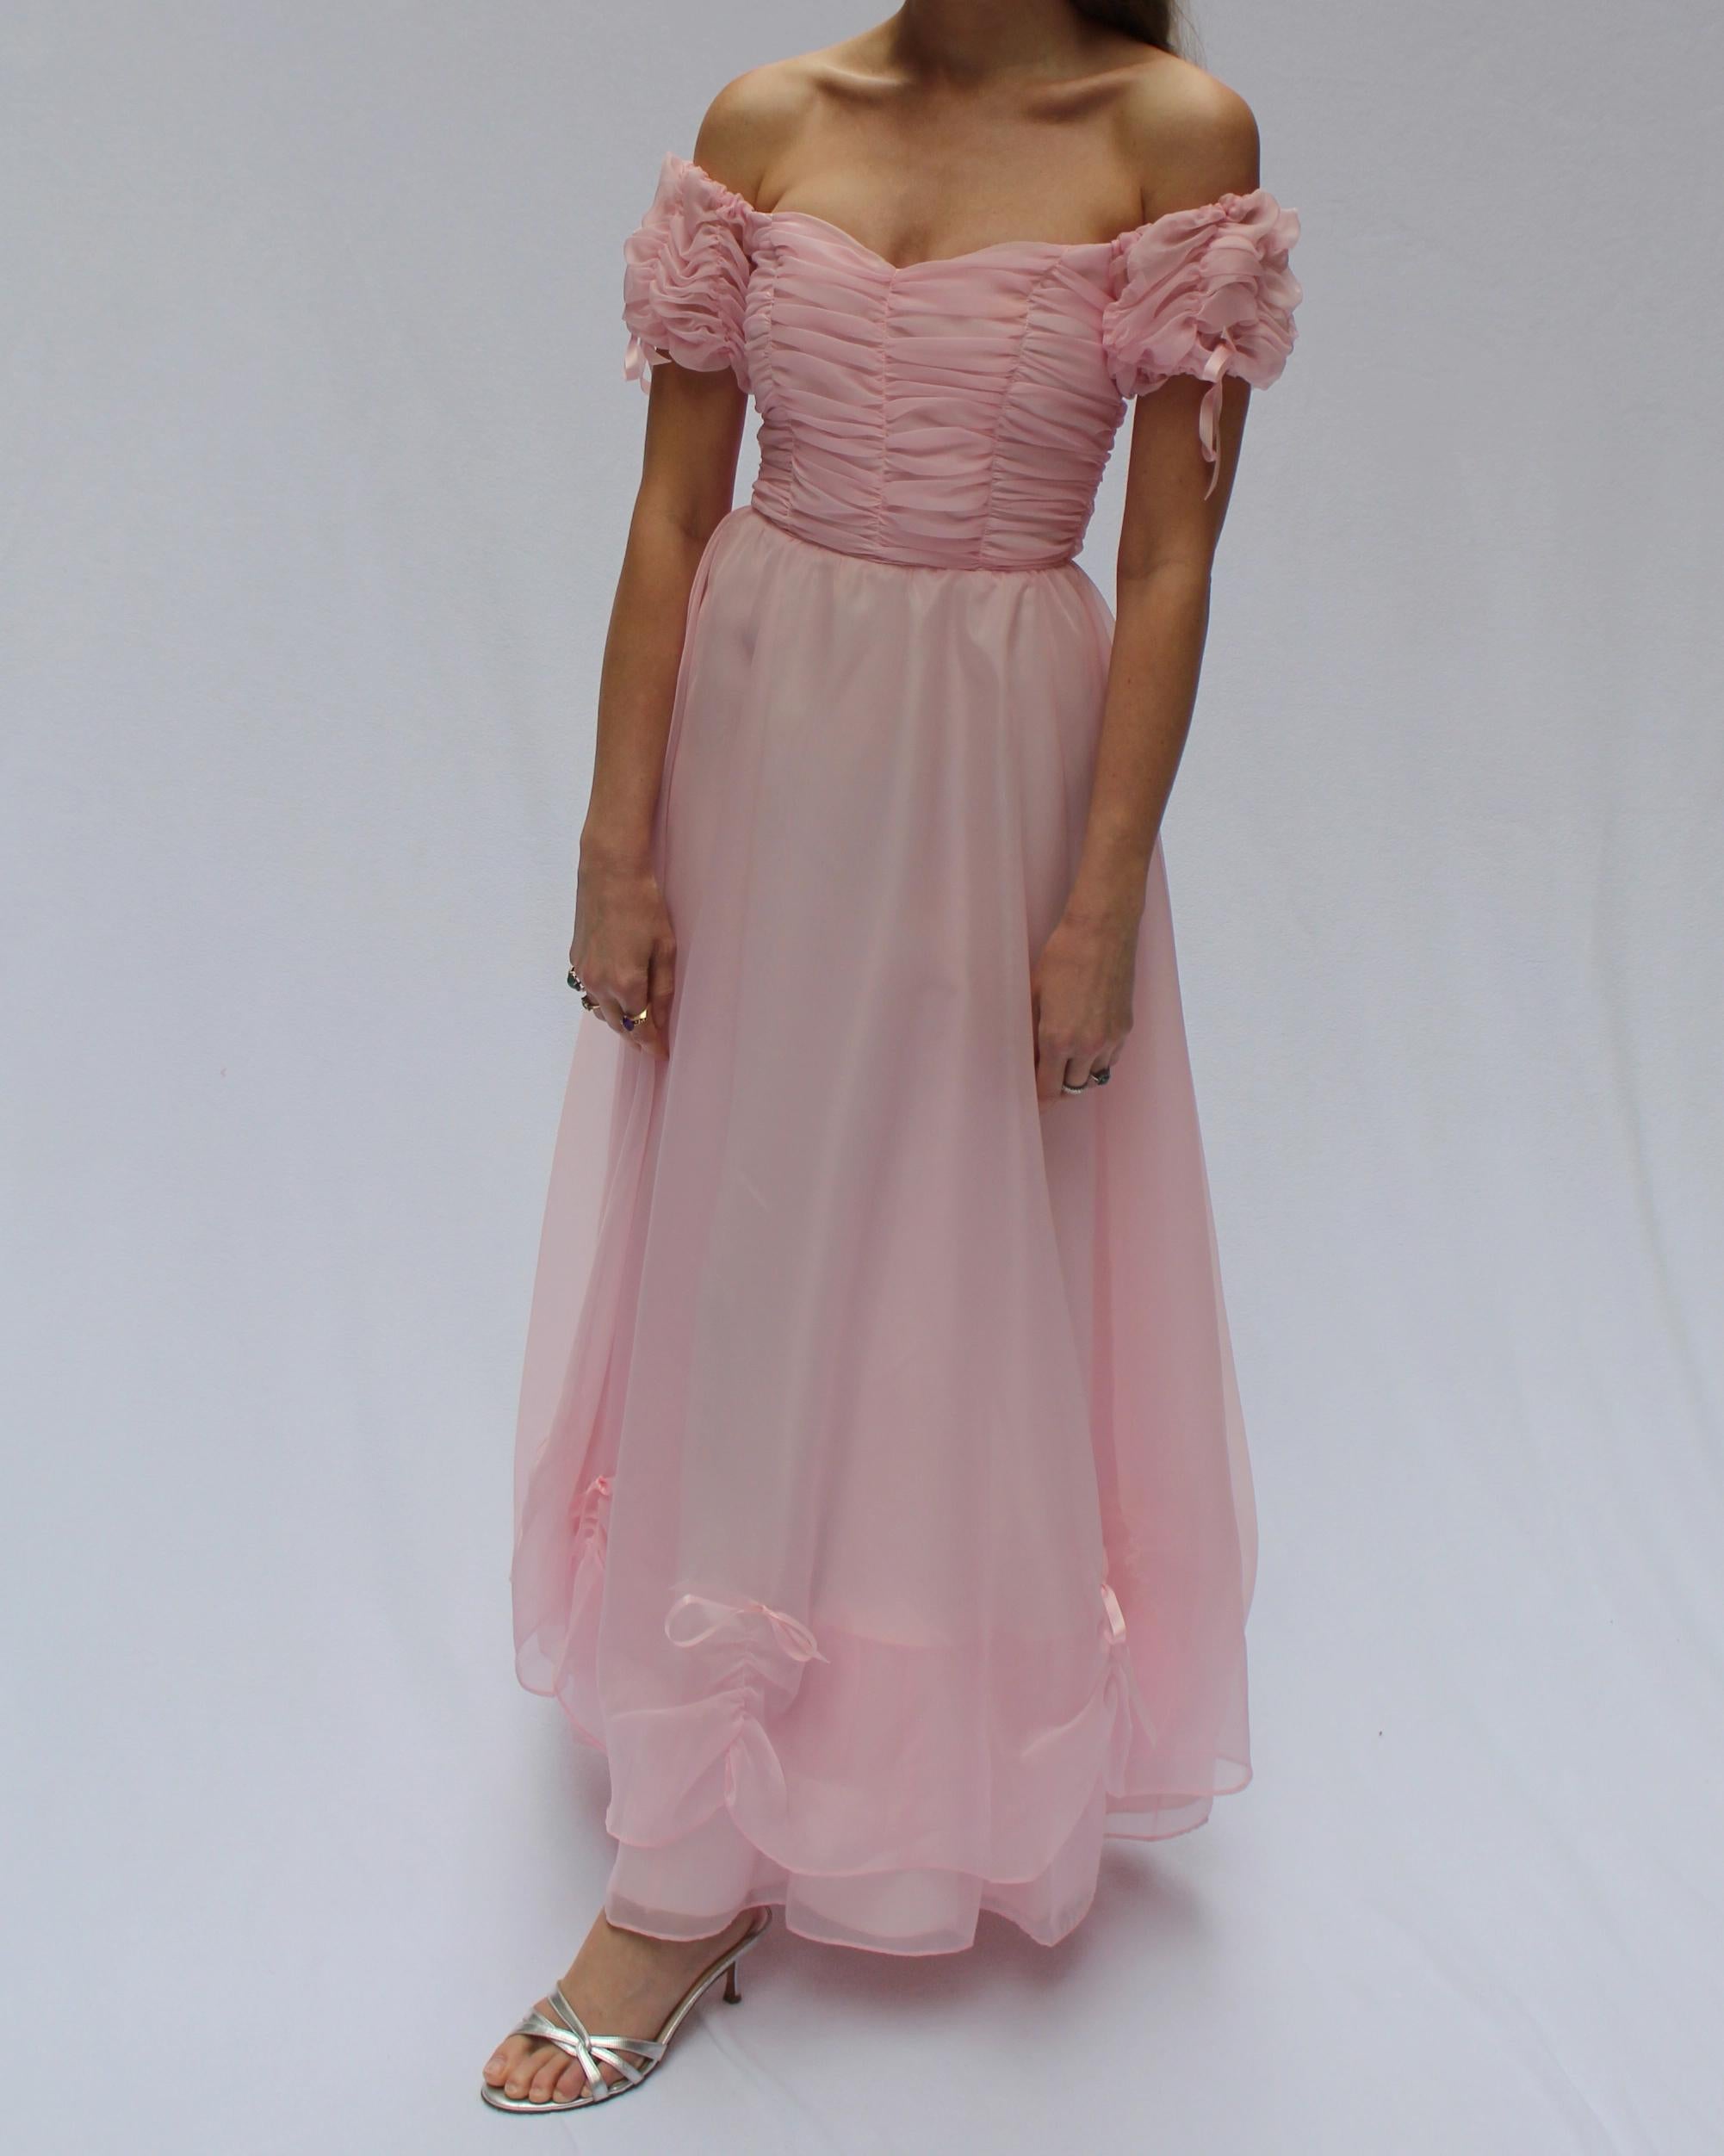 Vintage Off-the-Shoulder Tulle Princess Dress In Good Condition For Sale In New York, NY